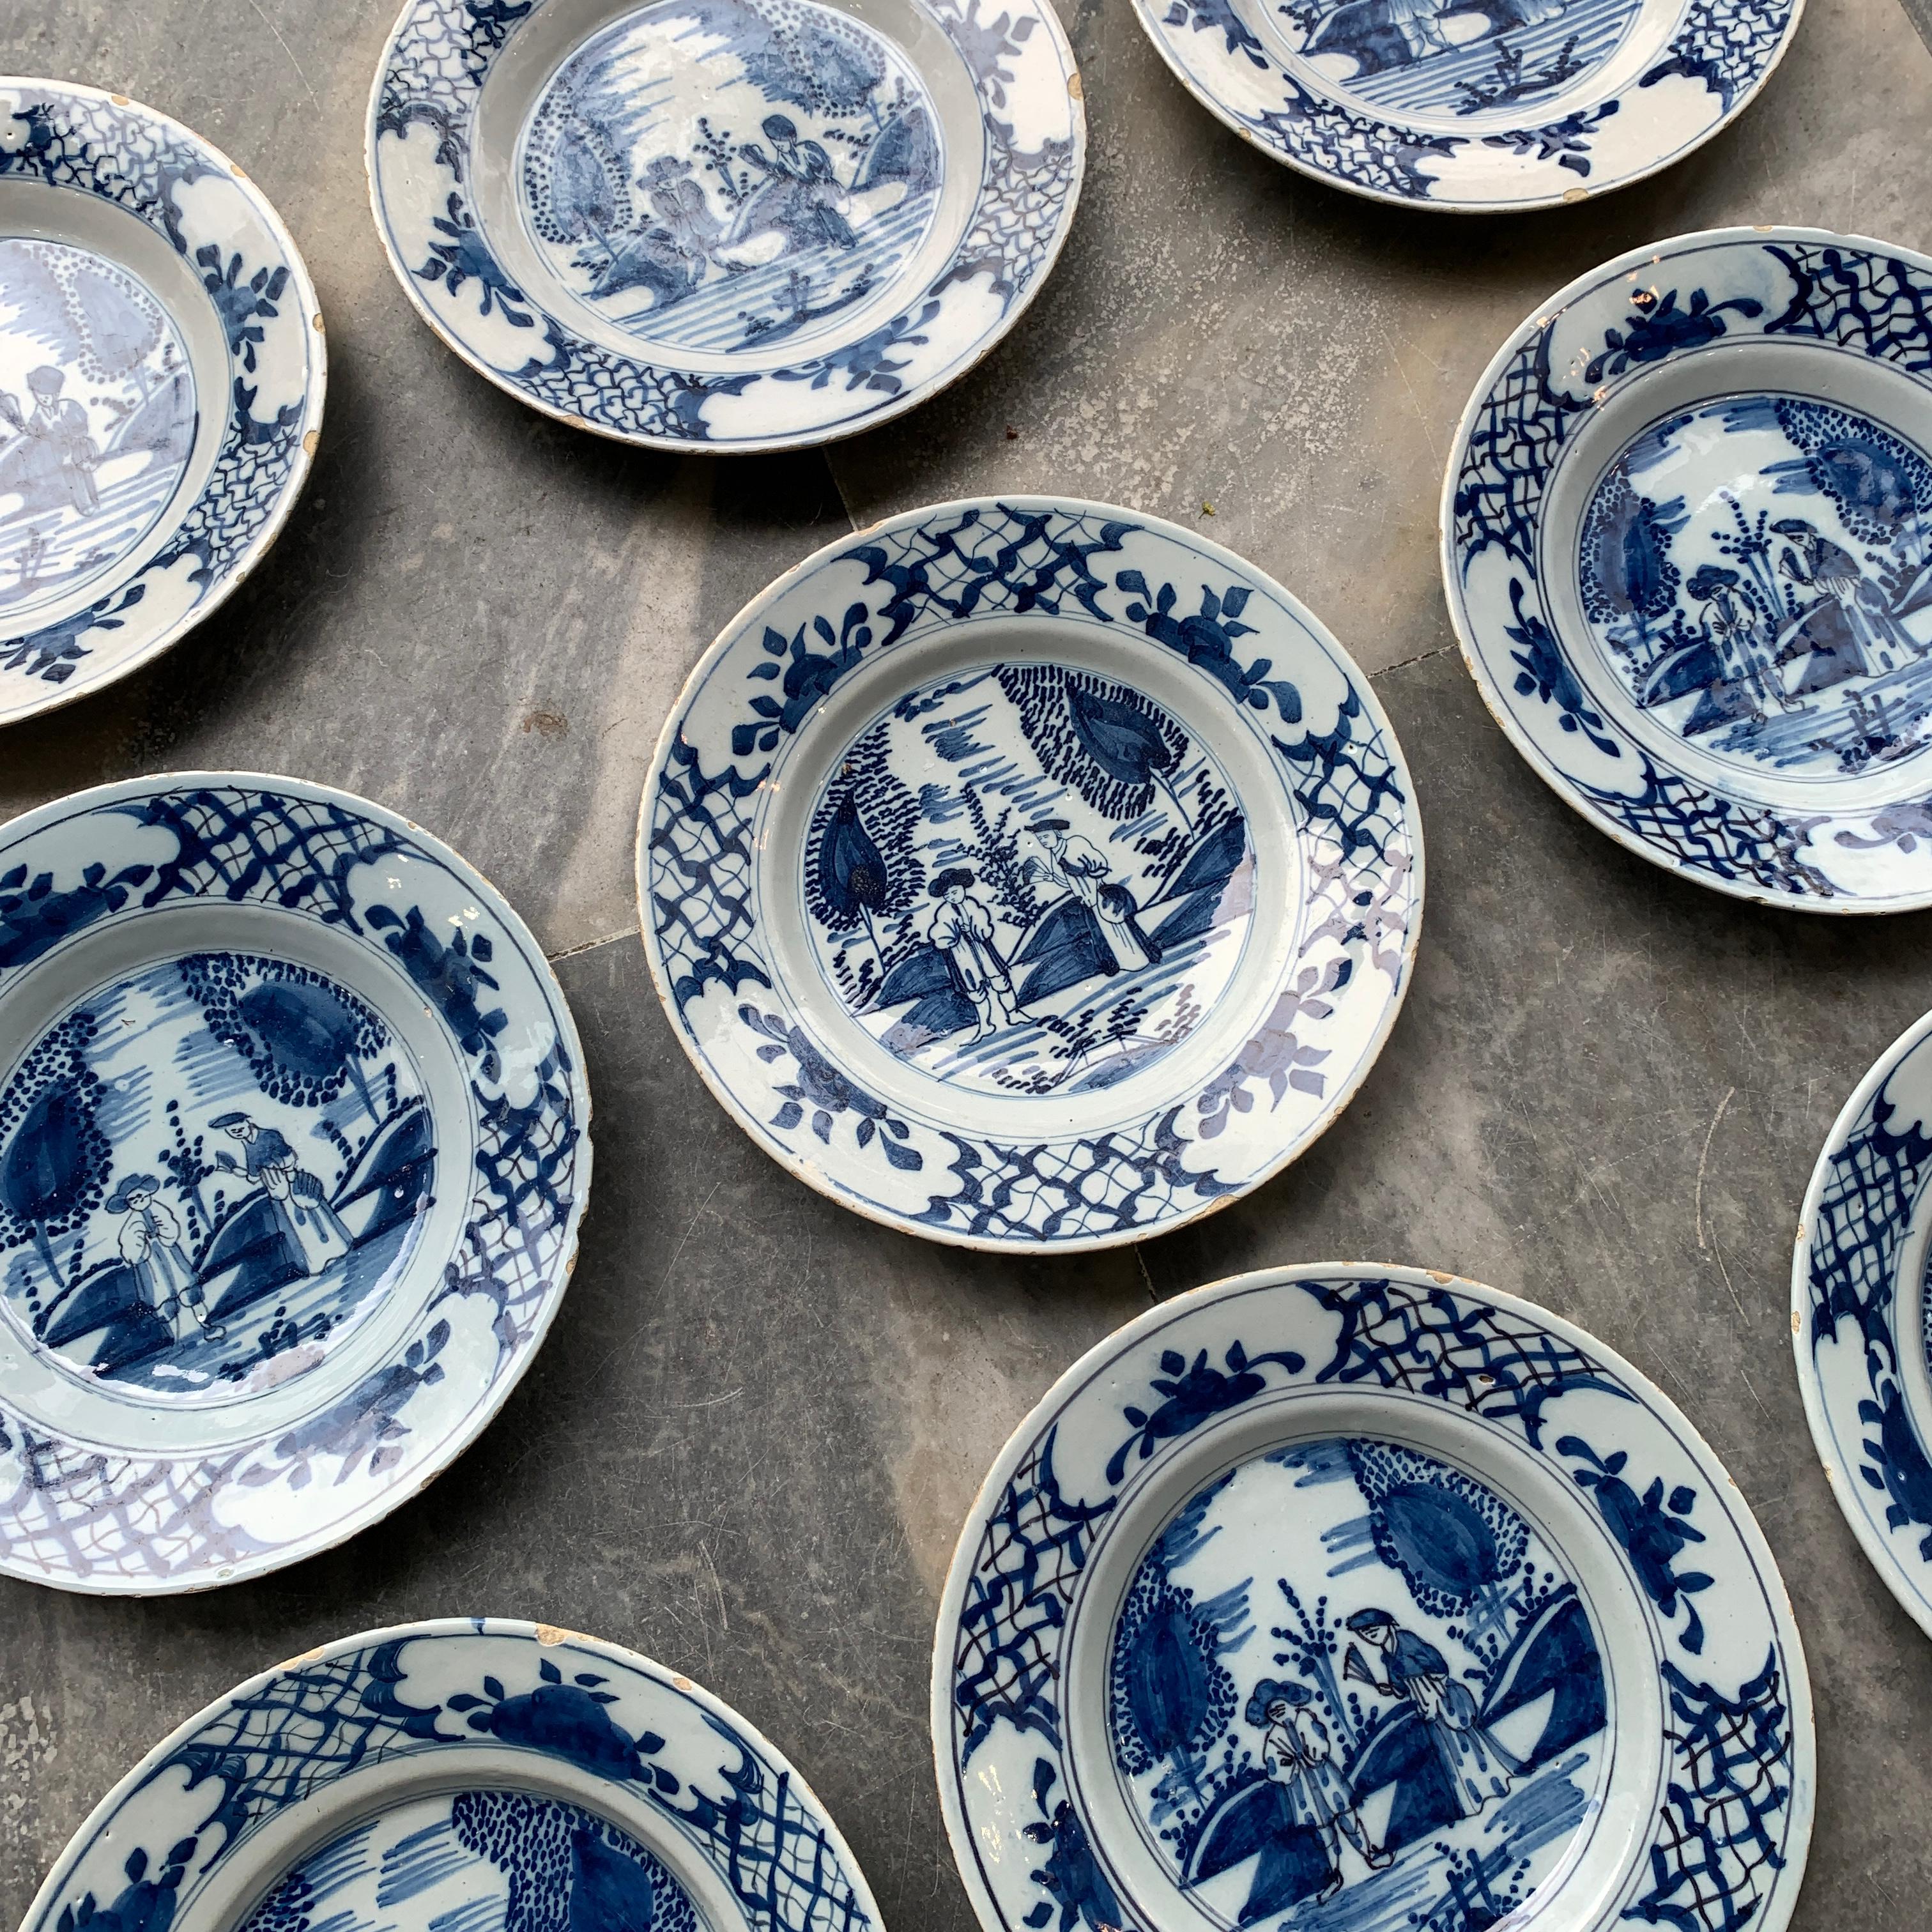 City: Delft
Workshop: Unknown
Date: circa 1760 - 1780

A wonderful set of no less than nine Dutch Delft plates with a lovely decoration of a couple in a garden. Probably based on the Chinese porcelain plate with the Governor Duff